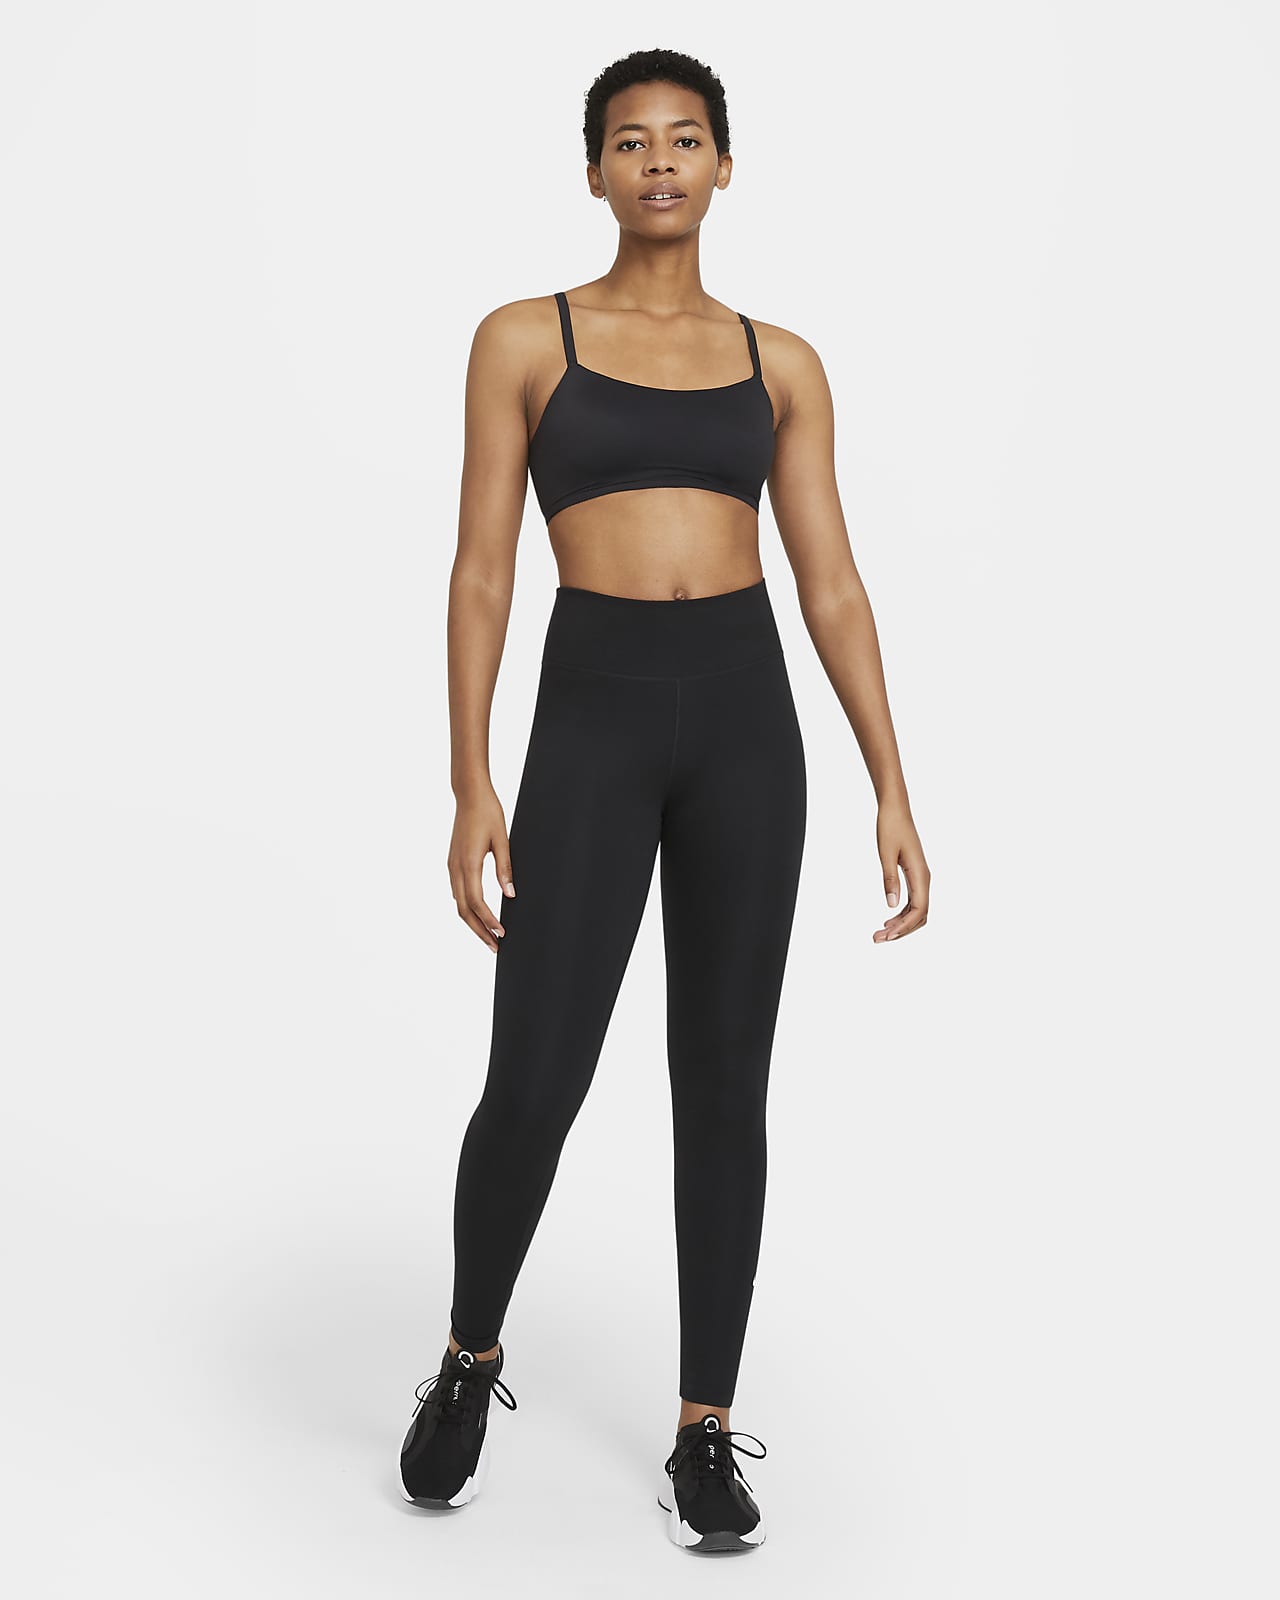 https://static.nike.com/a/images/t_PDP_1280_v1/f_auto,q_auto:eco/76e910c4-d95a-4567-b95d-9e83ac5a26fa/leggings-de-cintura-normal-one-mulher-VCXzqM.png